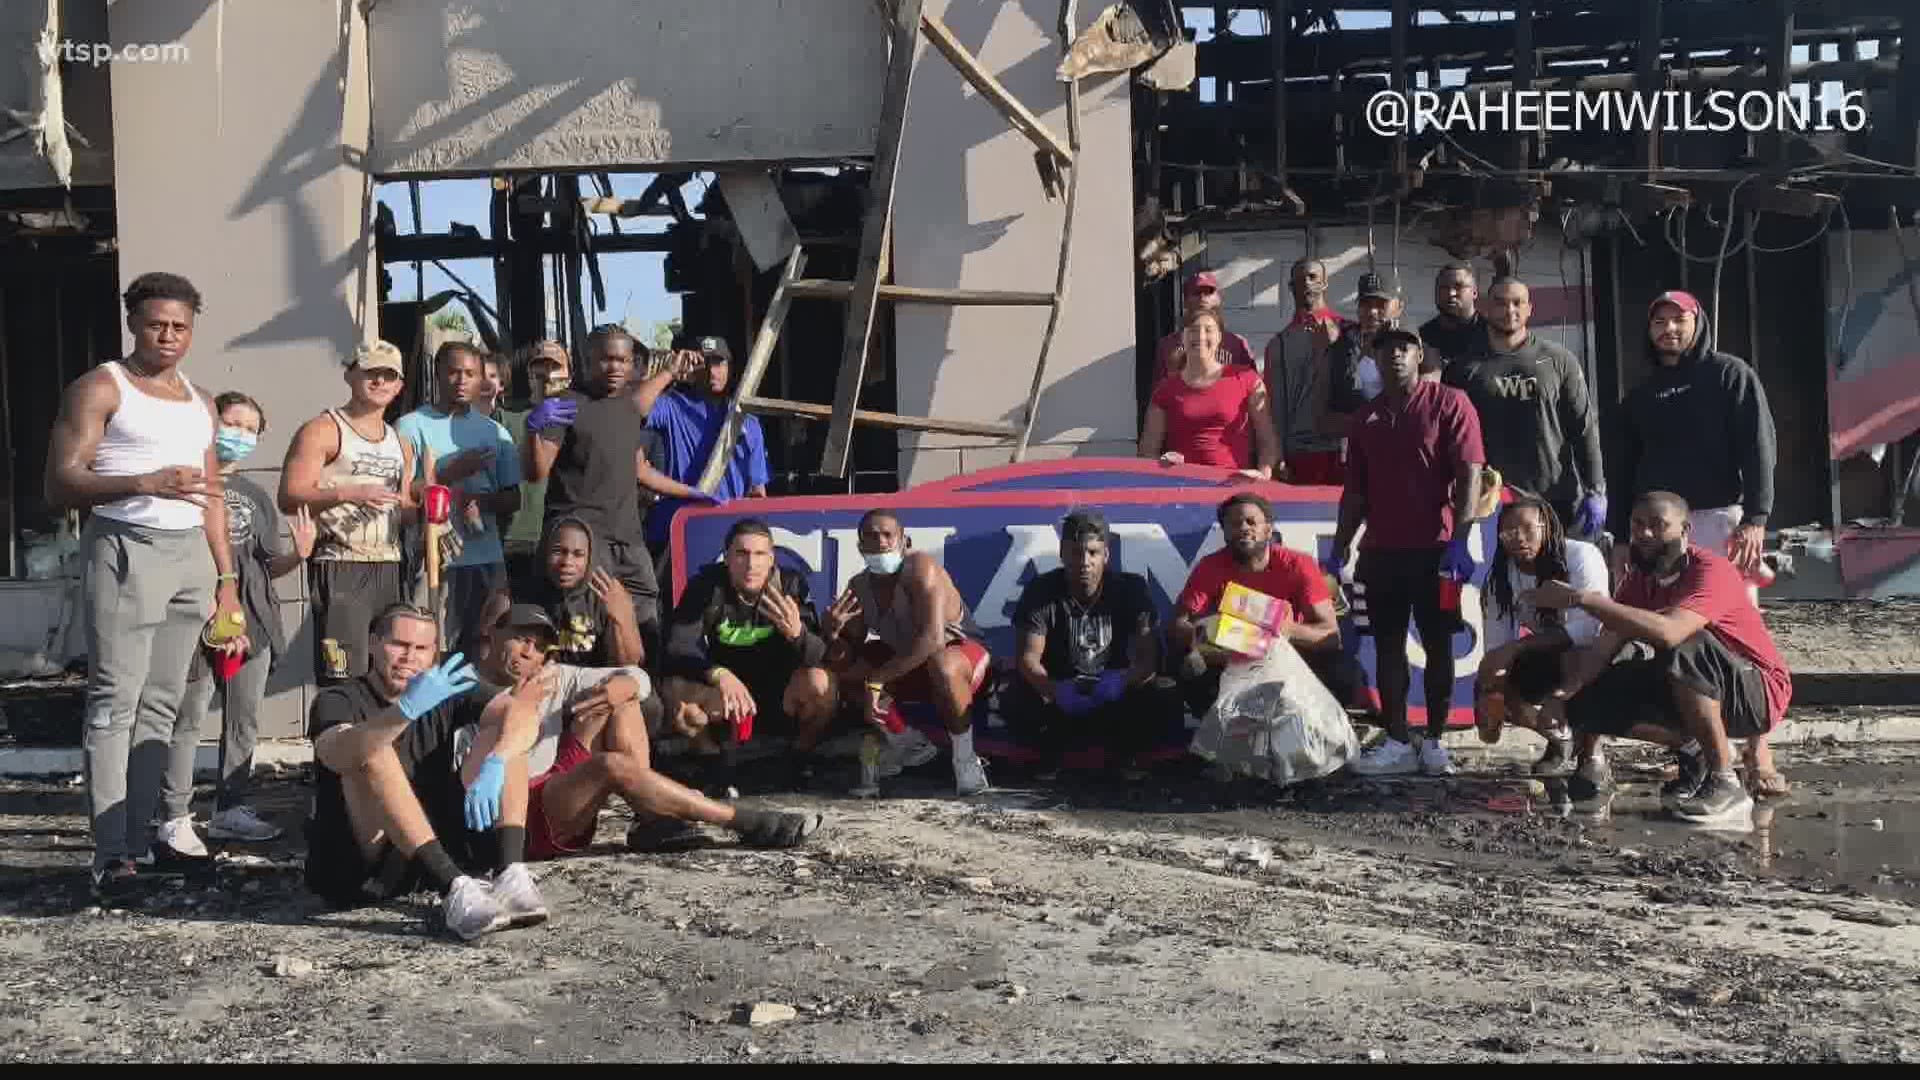 About a dozen Tampa-area football players helped to clean up the Champs Sports store after it was destroyed in a fire during protests Saturday.